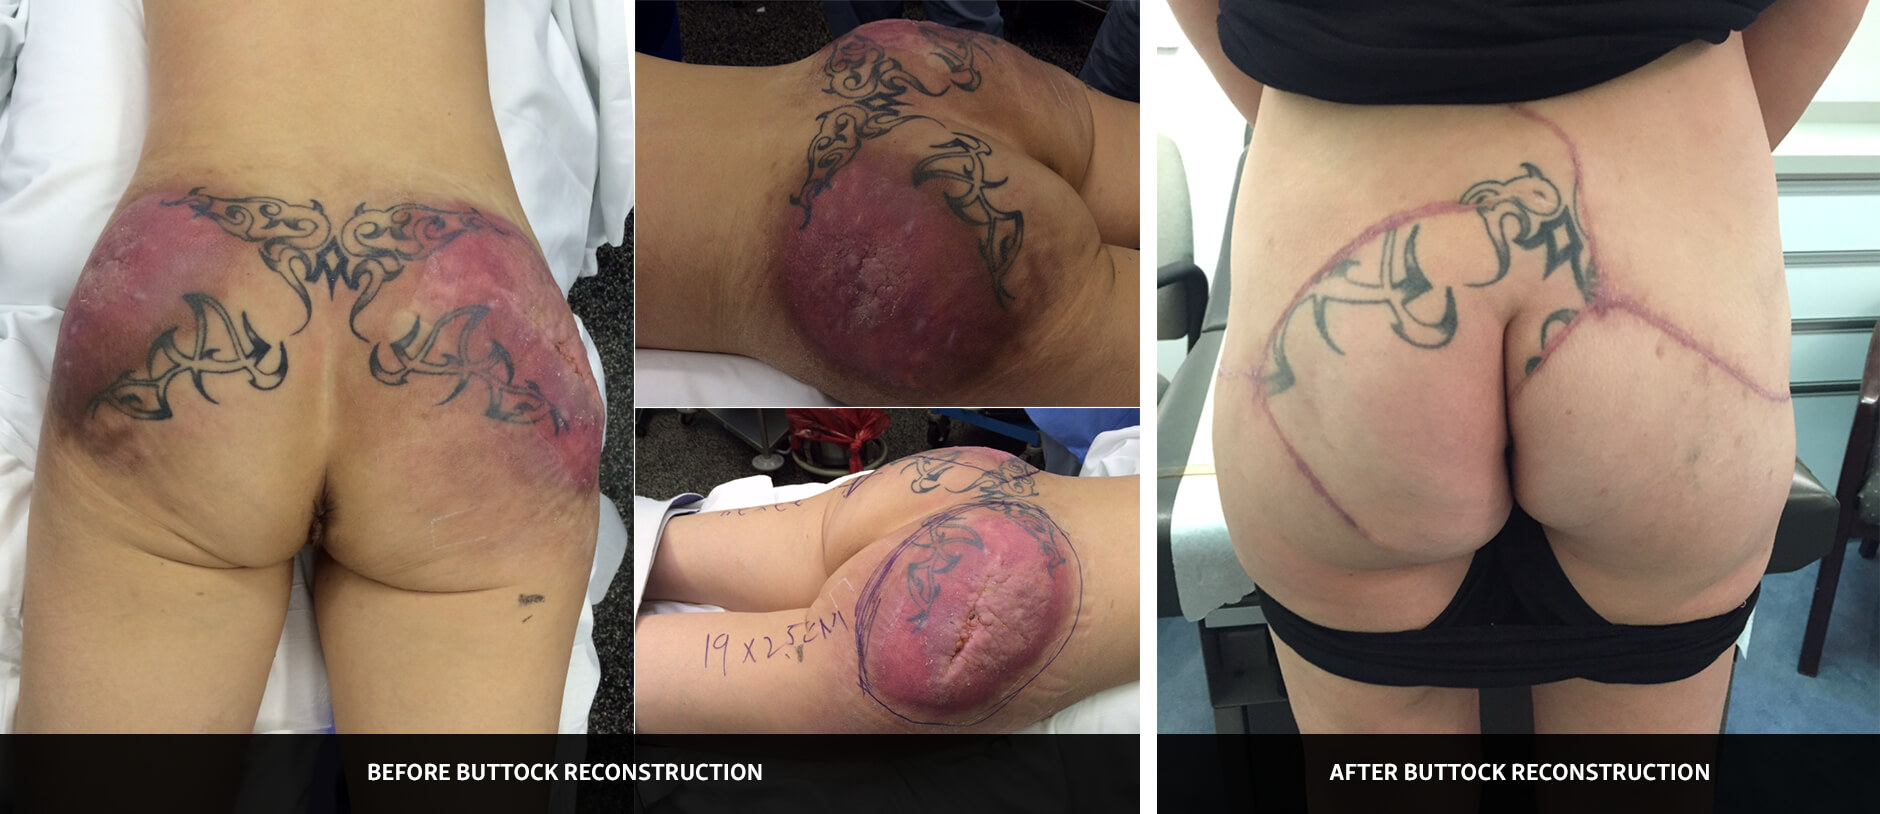 Case Study 03 - before and after photos of buttock reconstruction by Dr. Mir